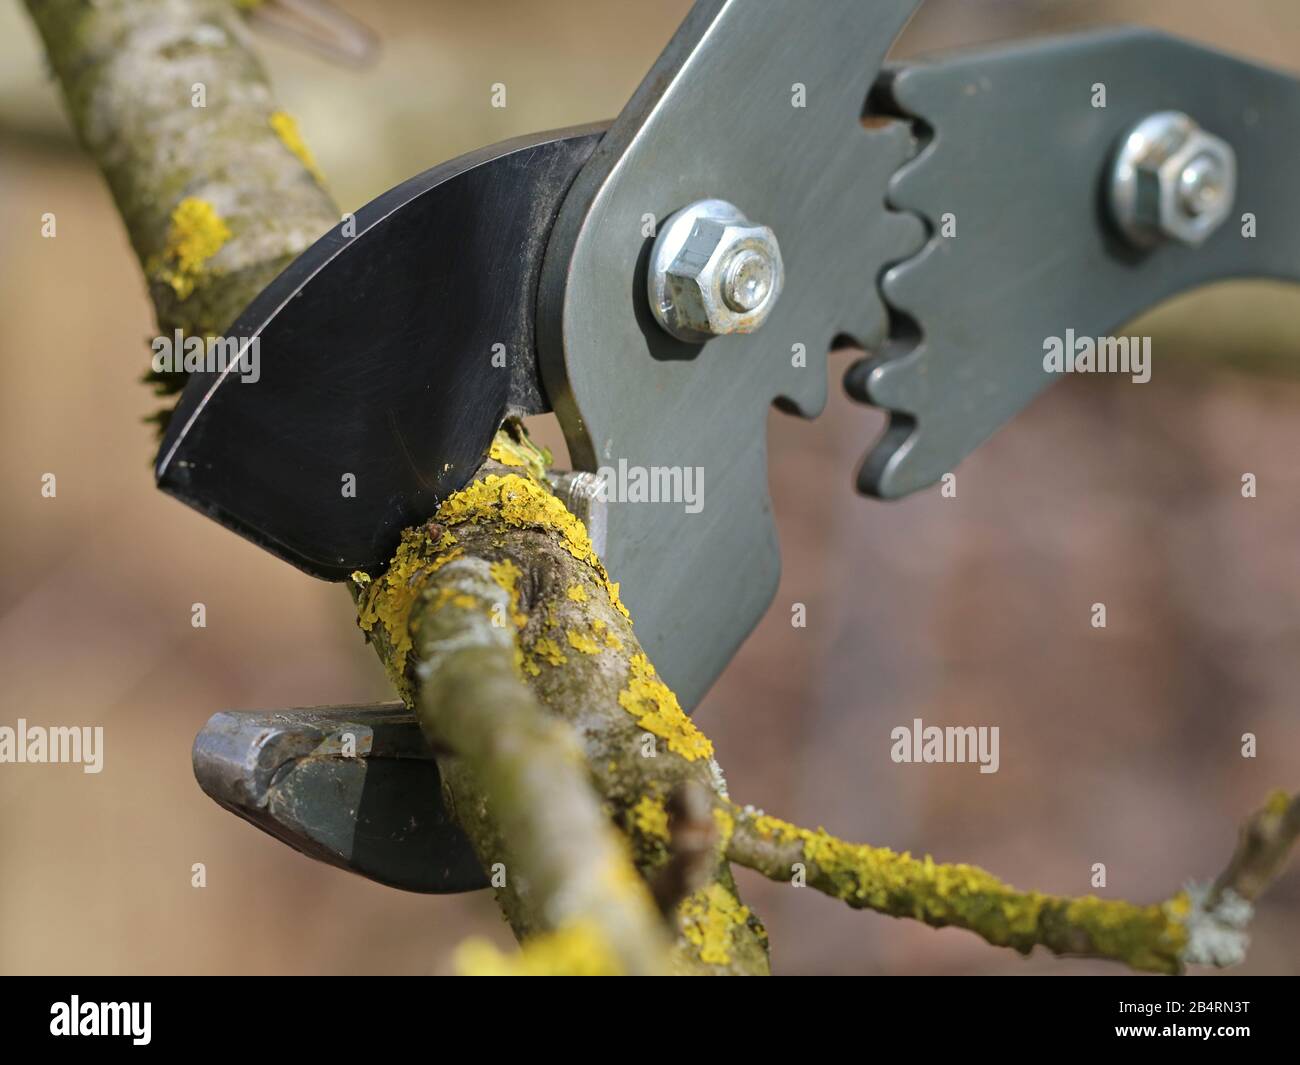 cutting old tree branches with anvil pruning shear, close up Stock Photo